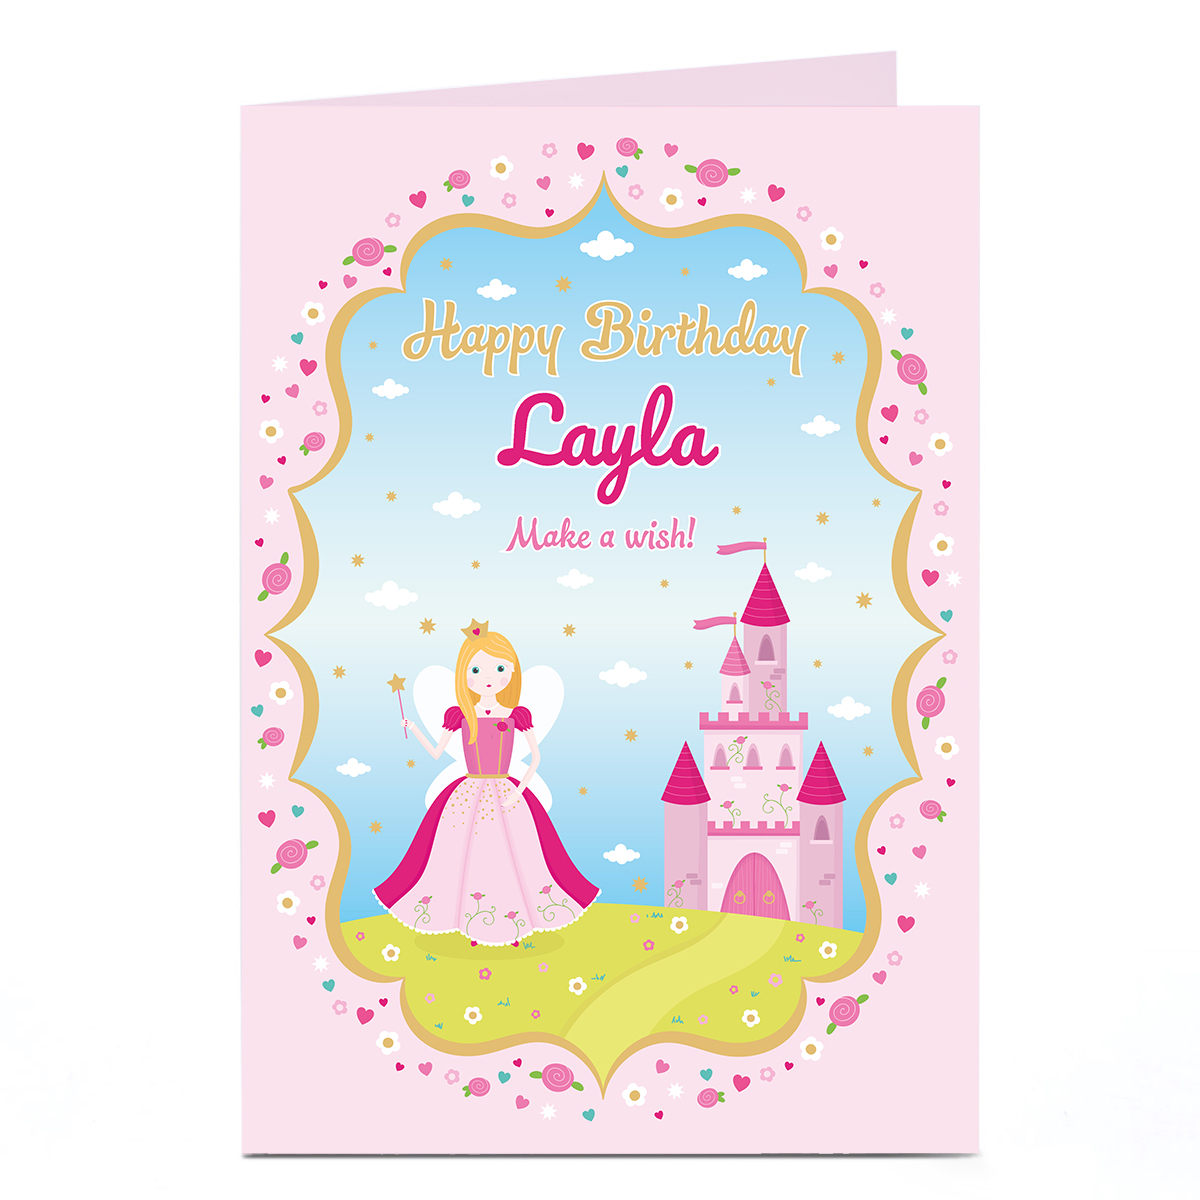 Buy Personalised Birthday Card - Fairy Princess for GBP 1.79 | Card ...